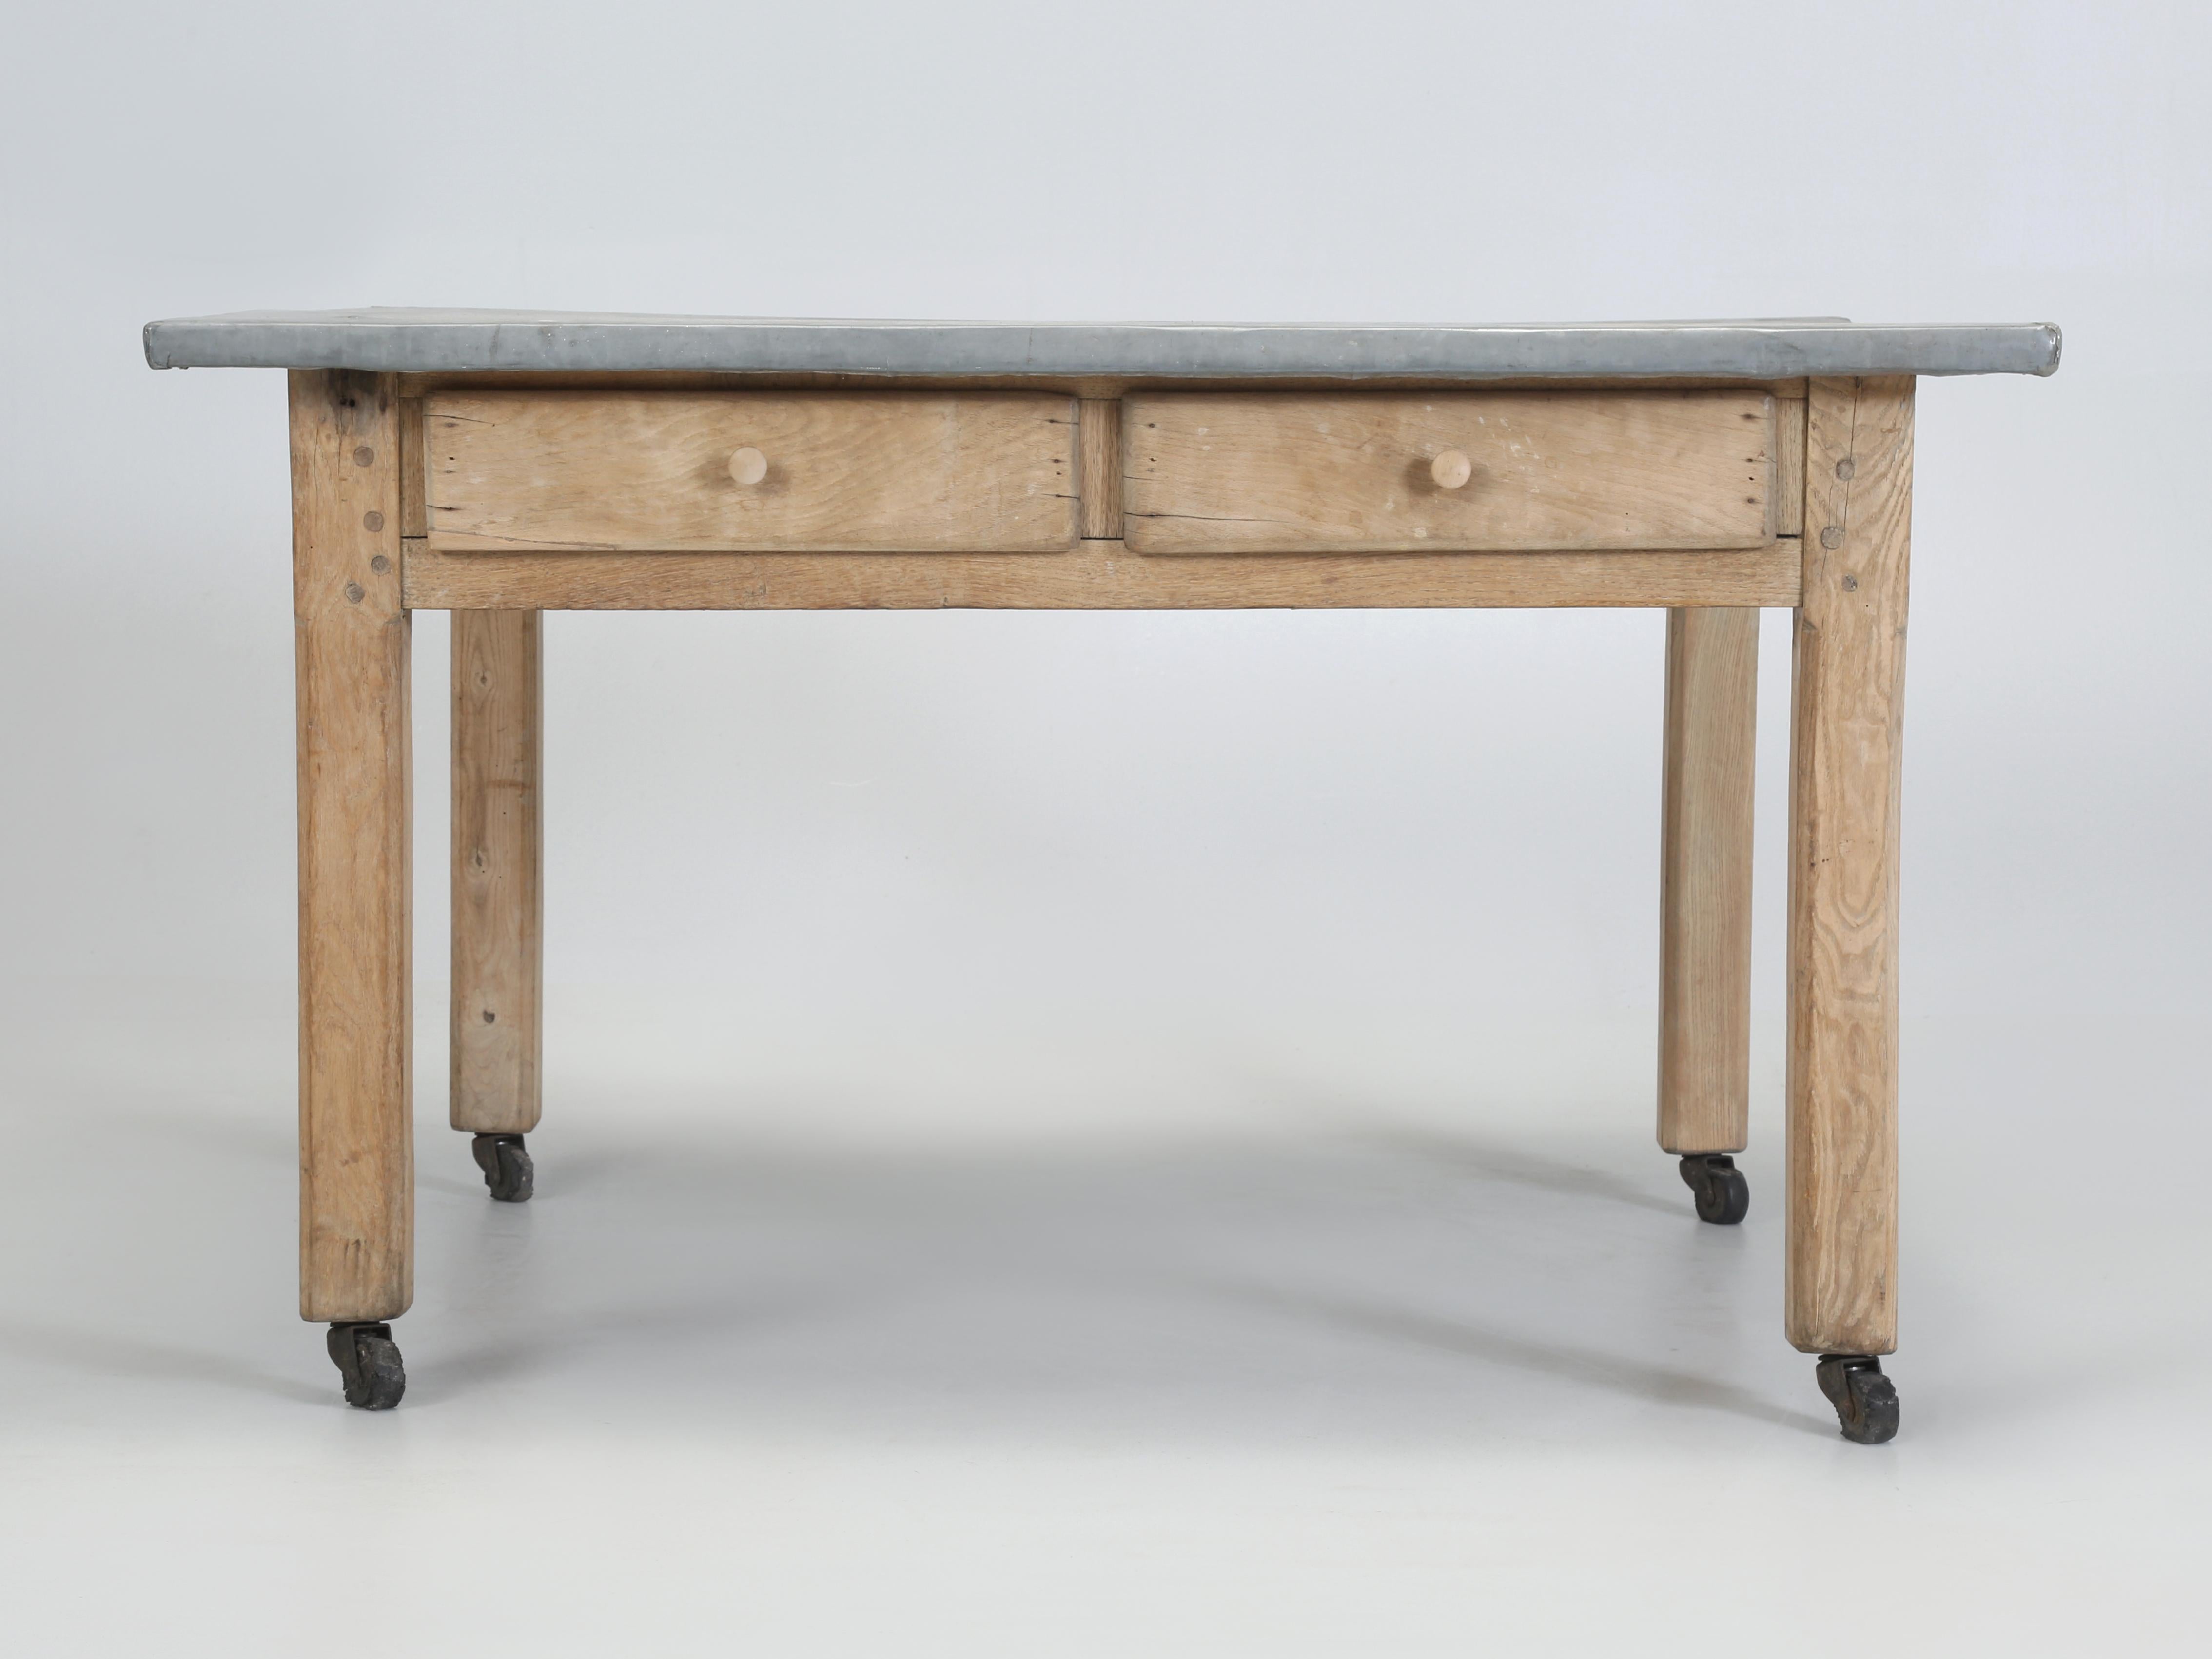 Antique European Work Table, Garden or Kitchen Table with Old Zinc Top 1920's In Good Condition For Sale In Chicago, IL